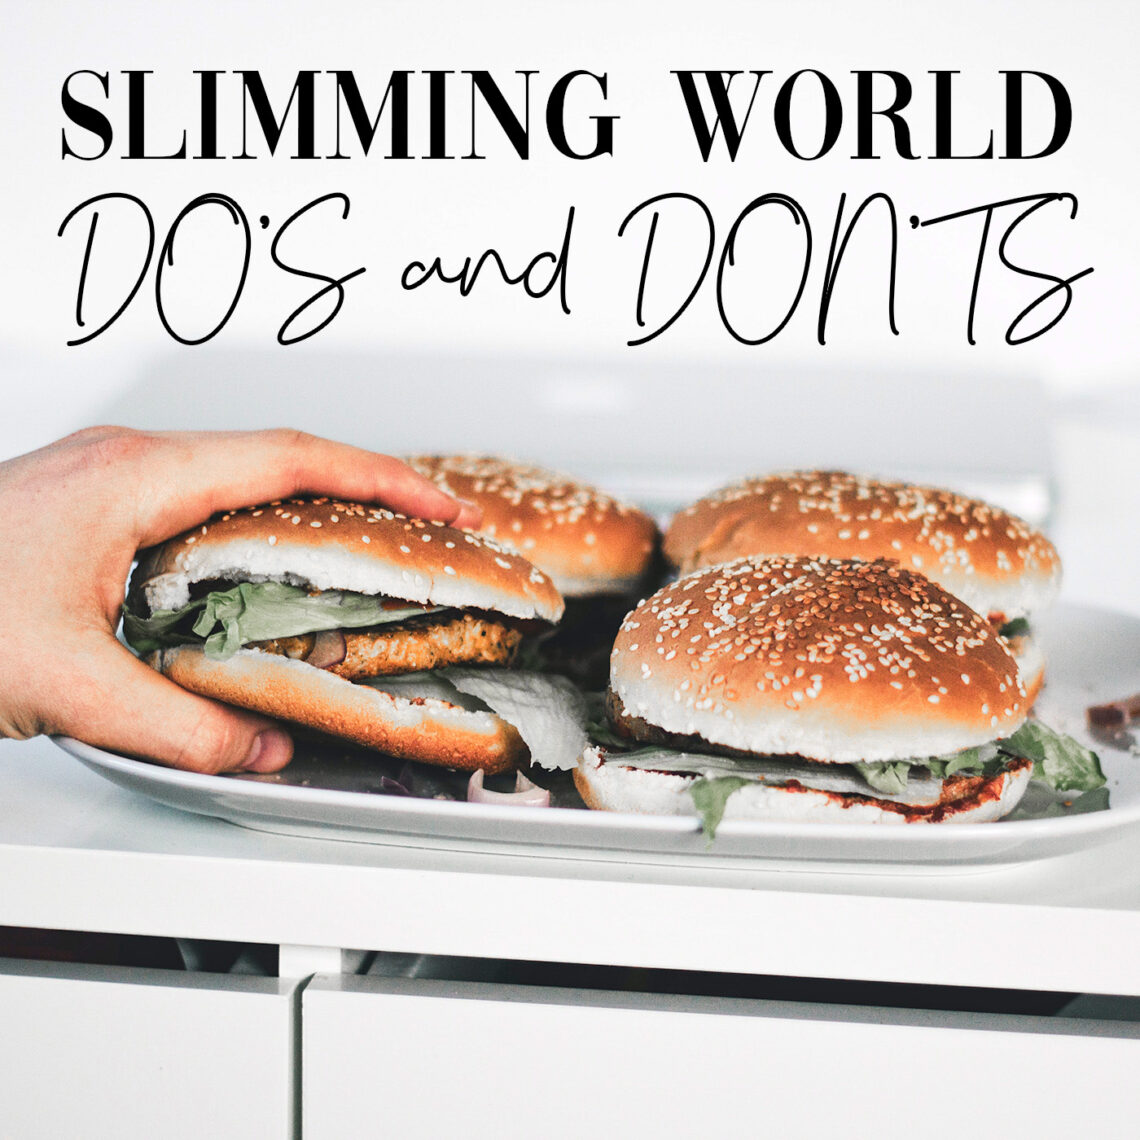 Slimming world do’s and don’s hamburger in hand